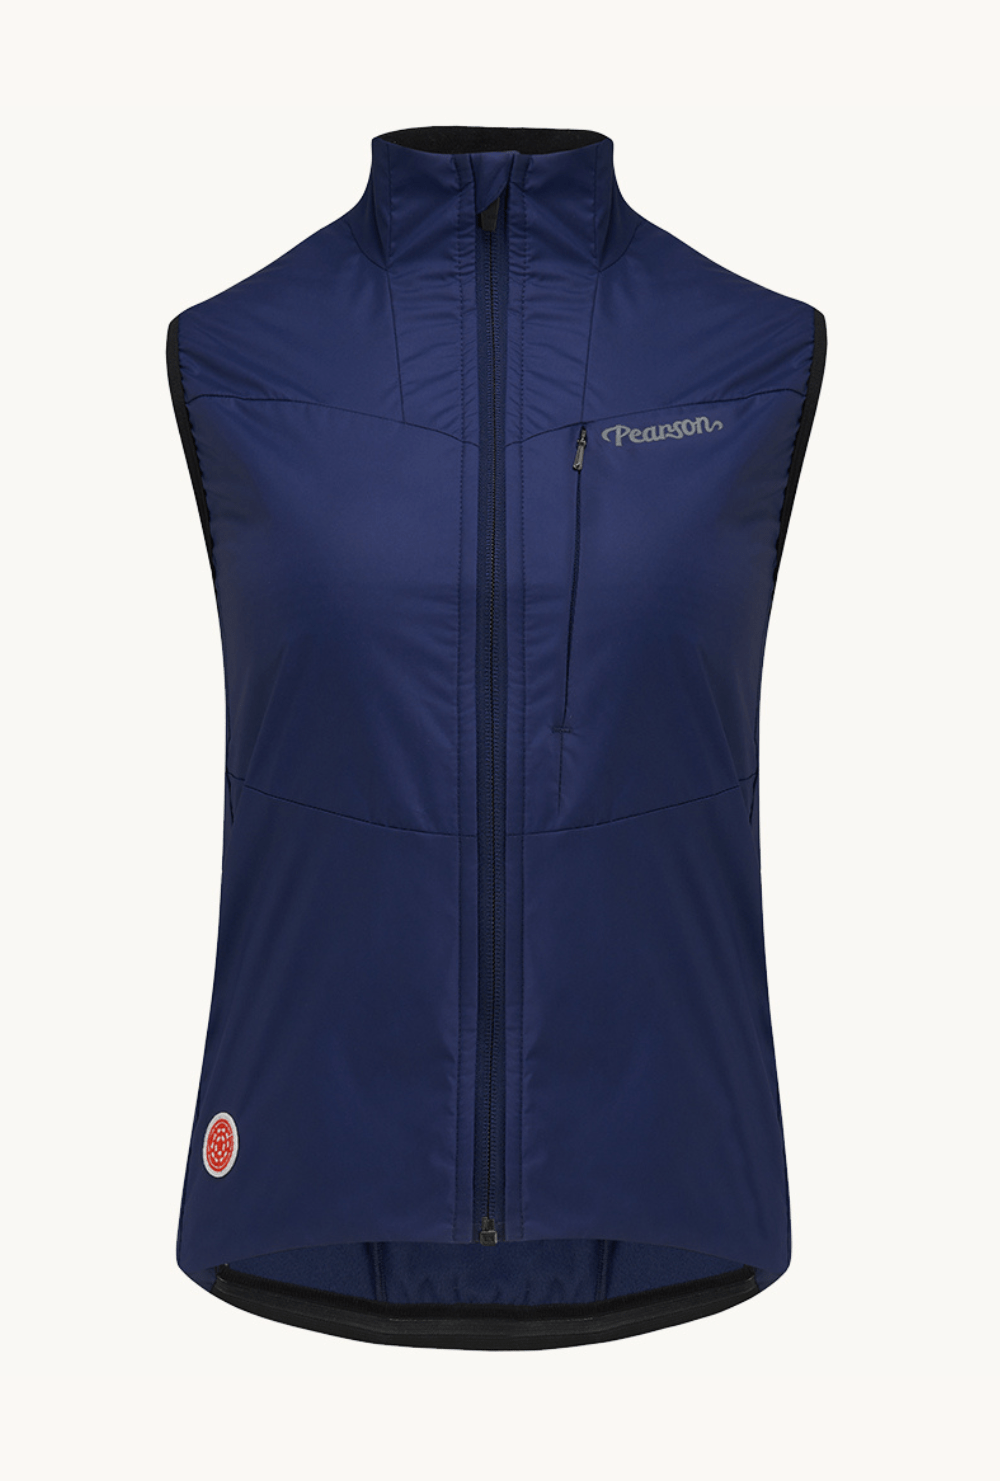 Pearson 1860  Feel The Benefits - Womens Road Insulated Gilet Blue Ink  Medium / Blue Ink